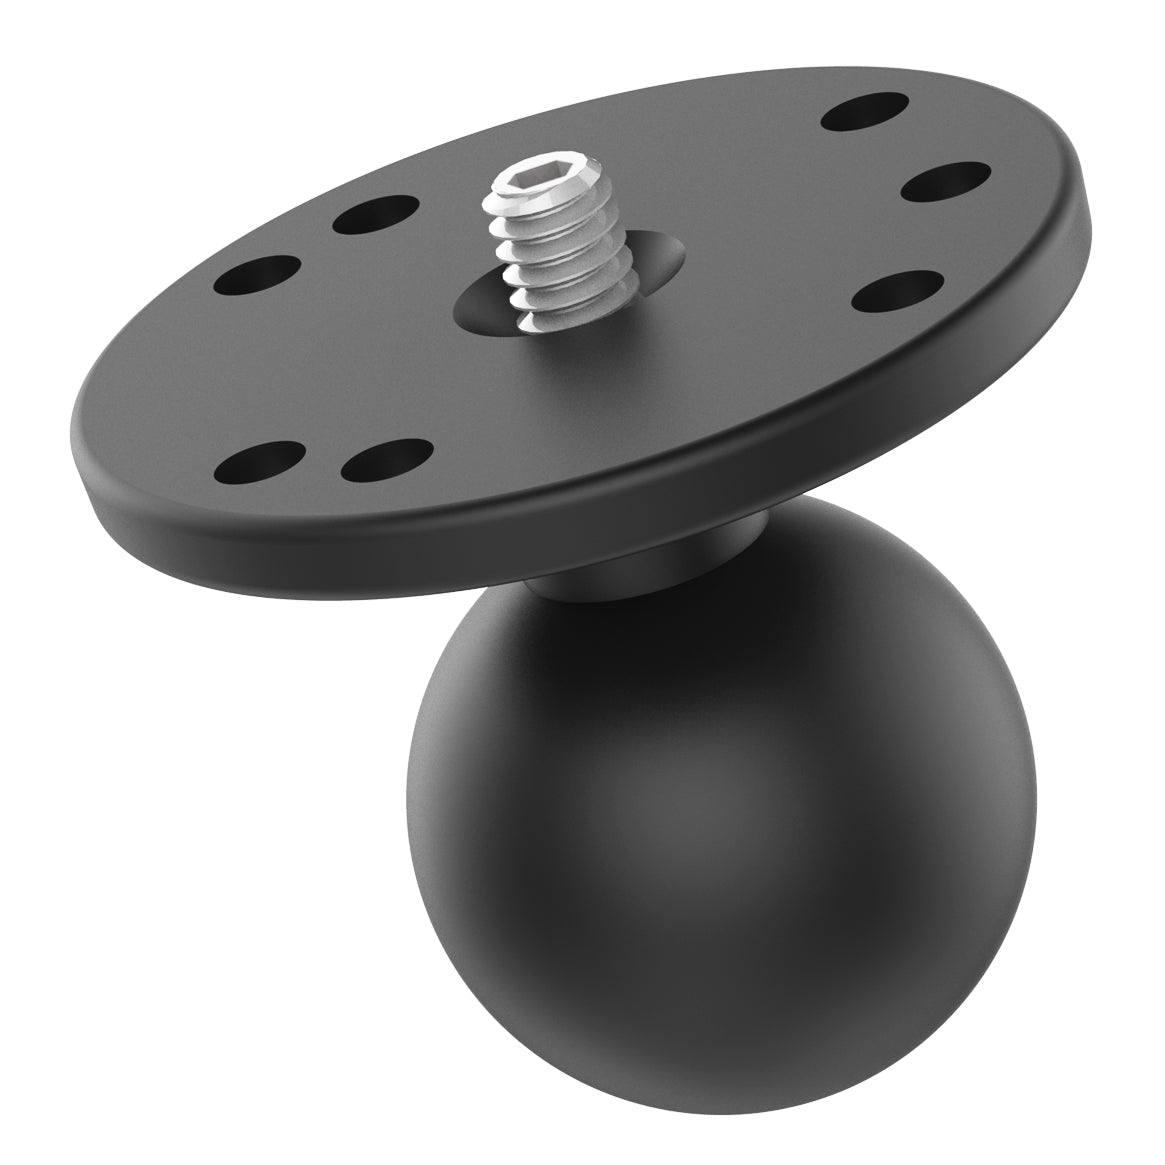 RAM® Track Ball™ Mount with 1/4-20 Action Camera Adapter – RAM Mounts